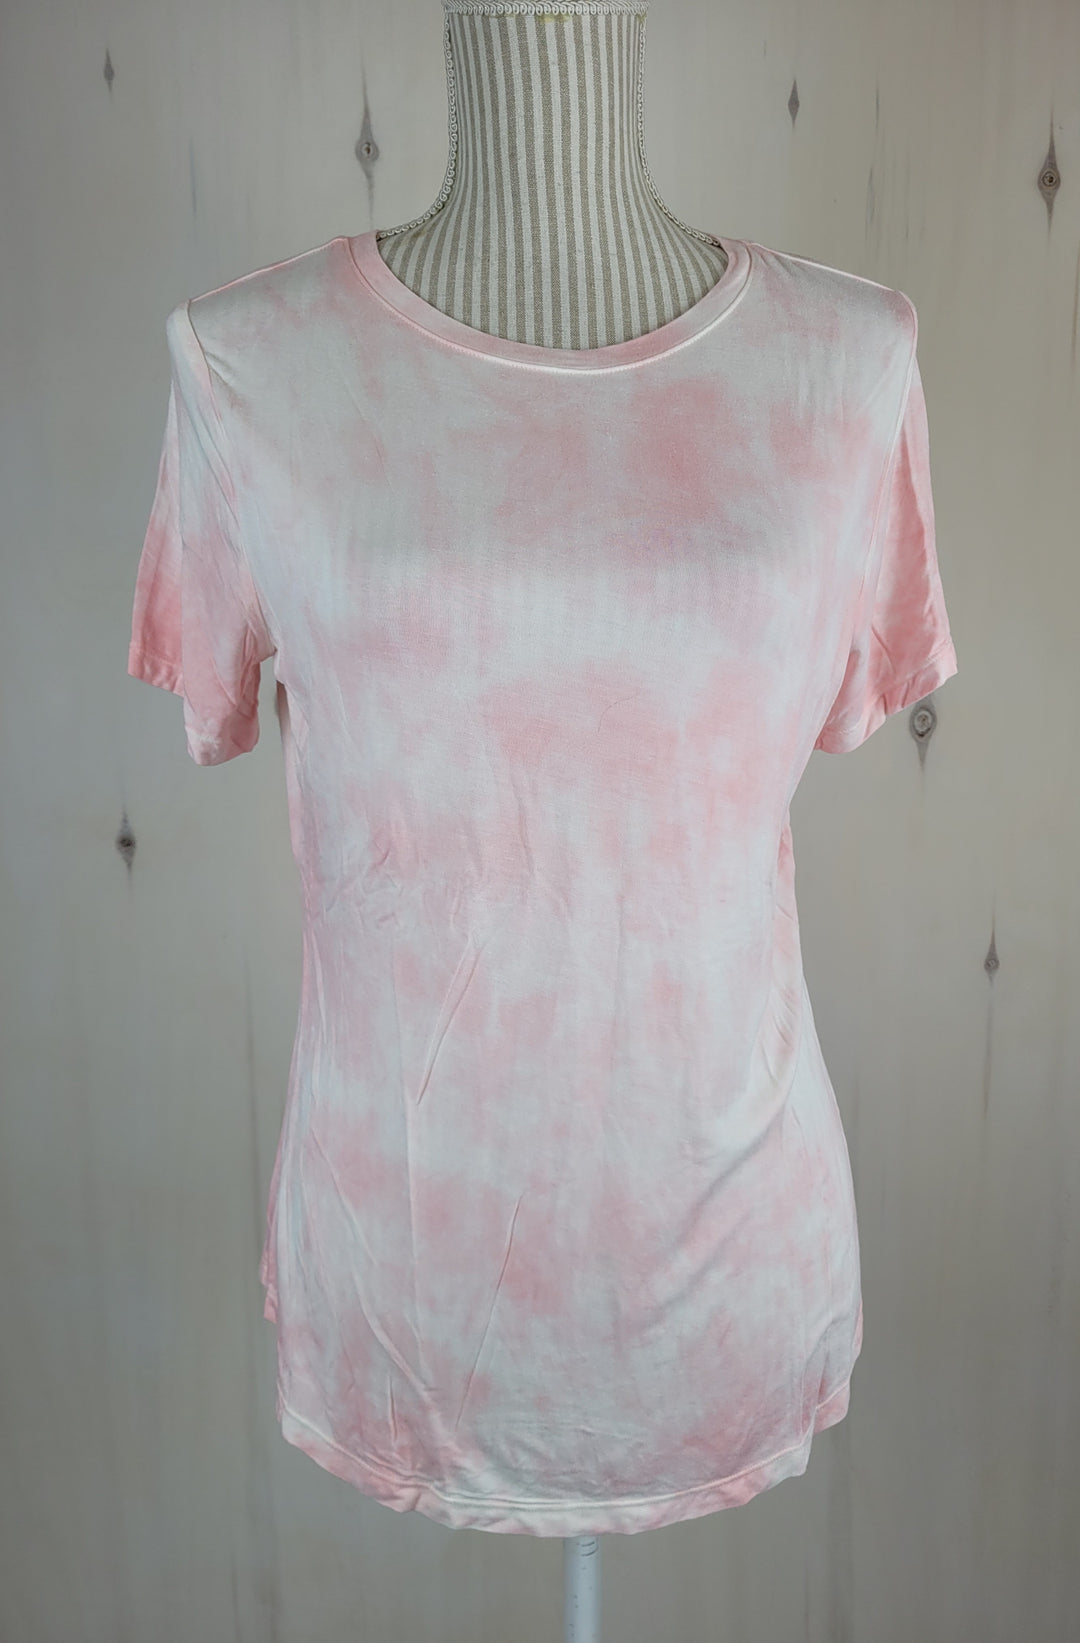 OLD NAVY LUXE ULTRA SOFT PASTEL PINK TIE DYE TOP LADIES SMALL EUC